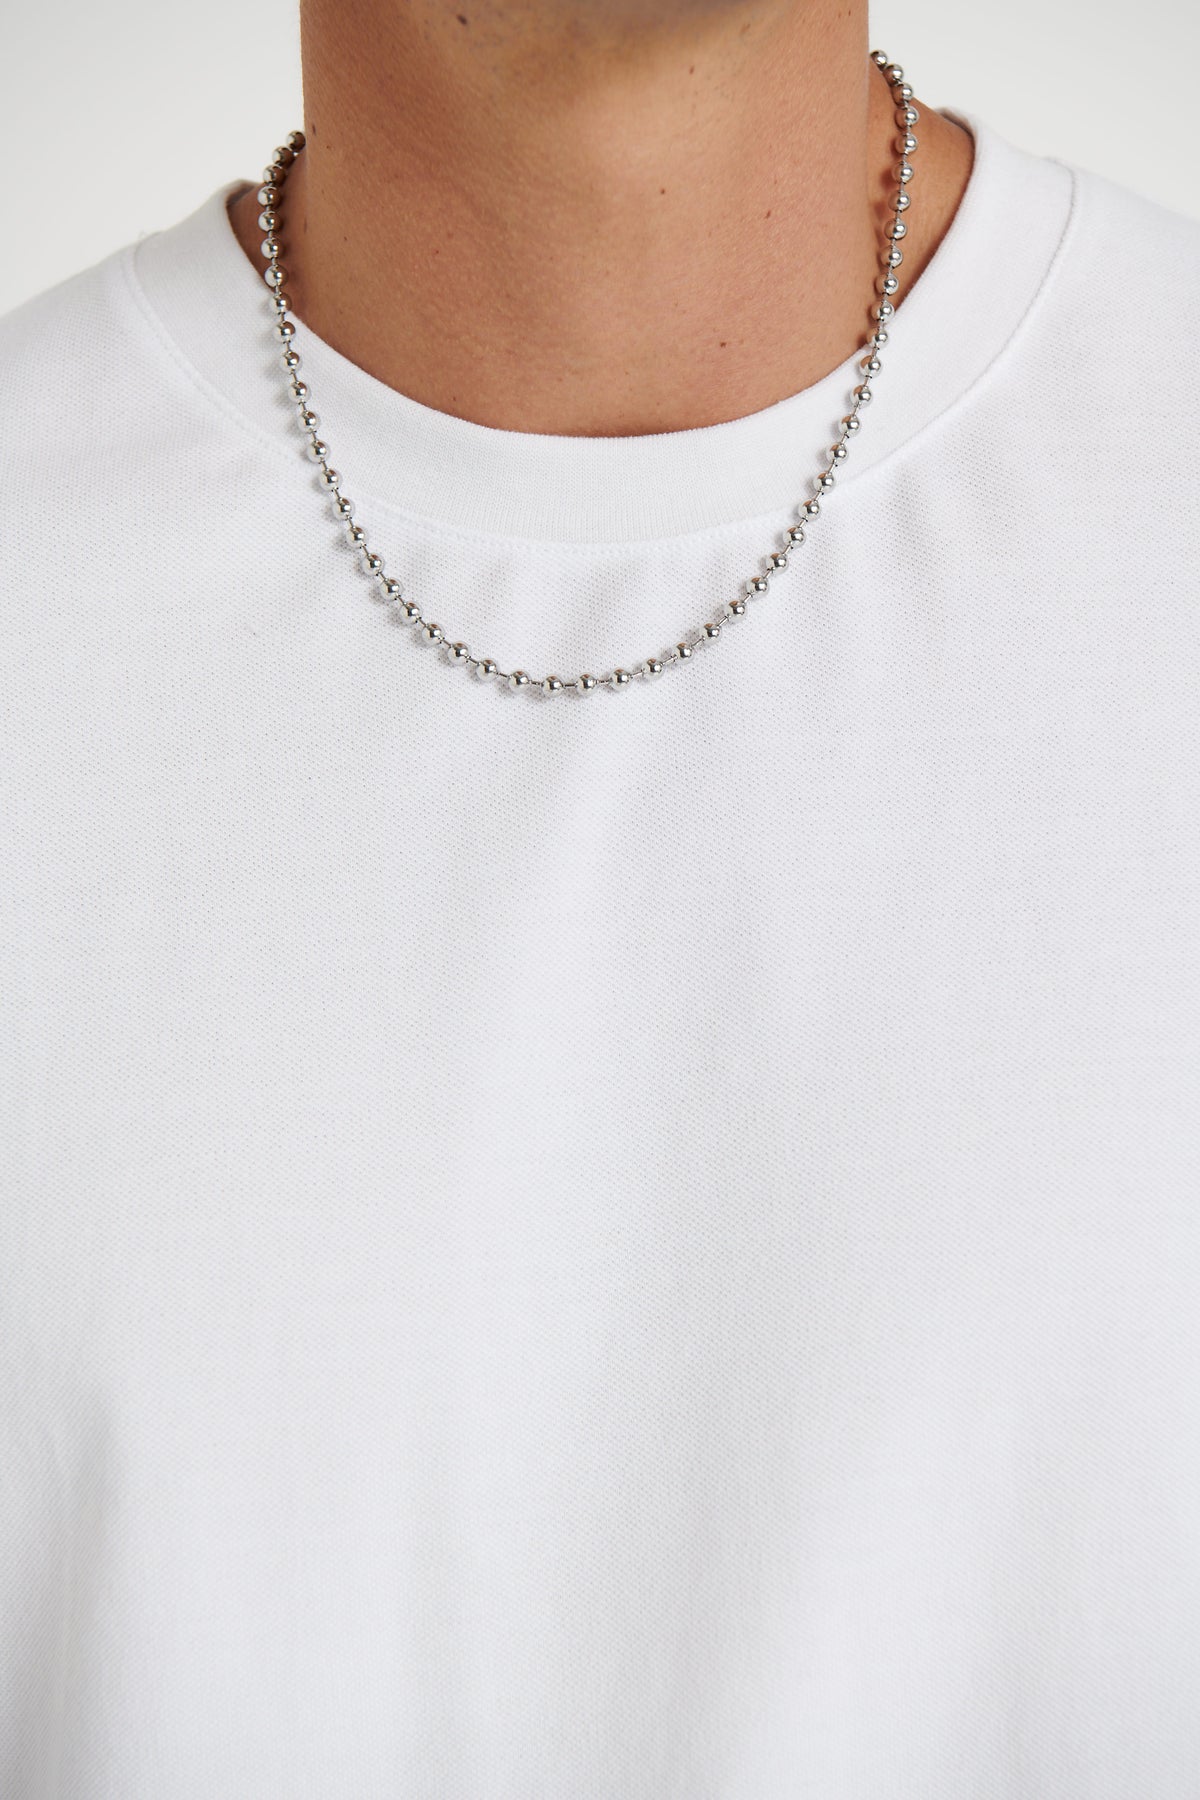 NTH 5mm Ball Chain Necklace Silver